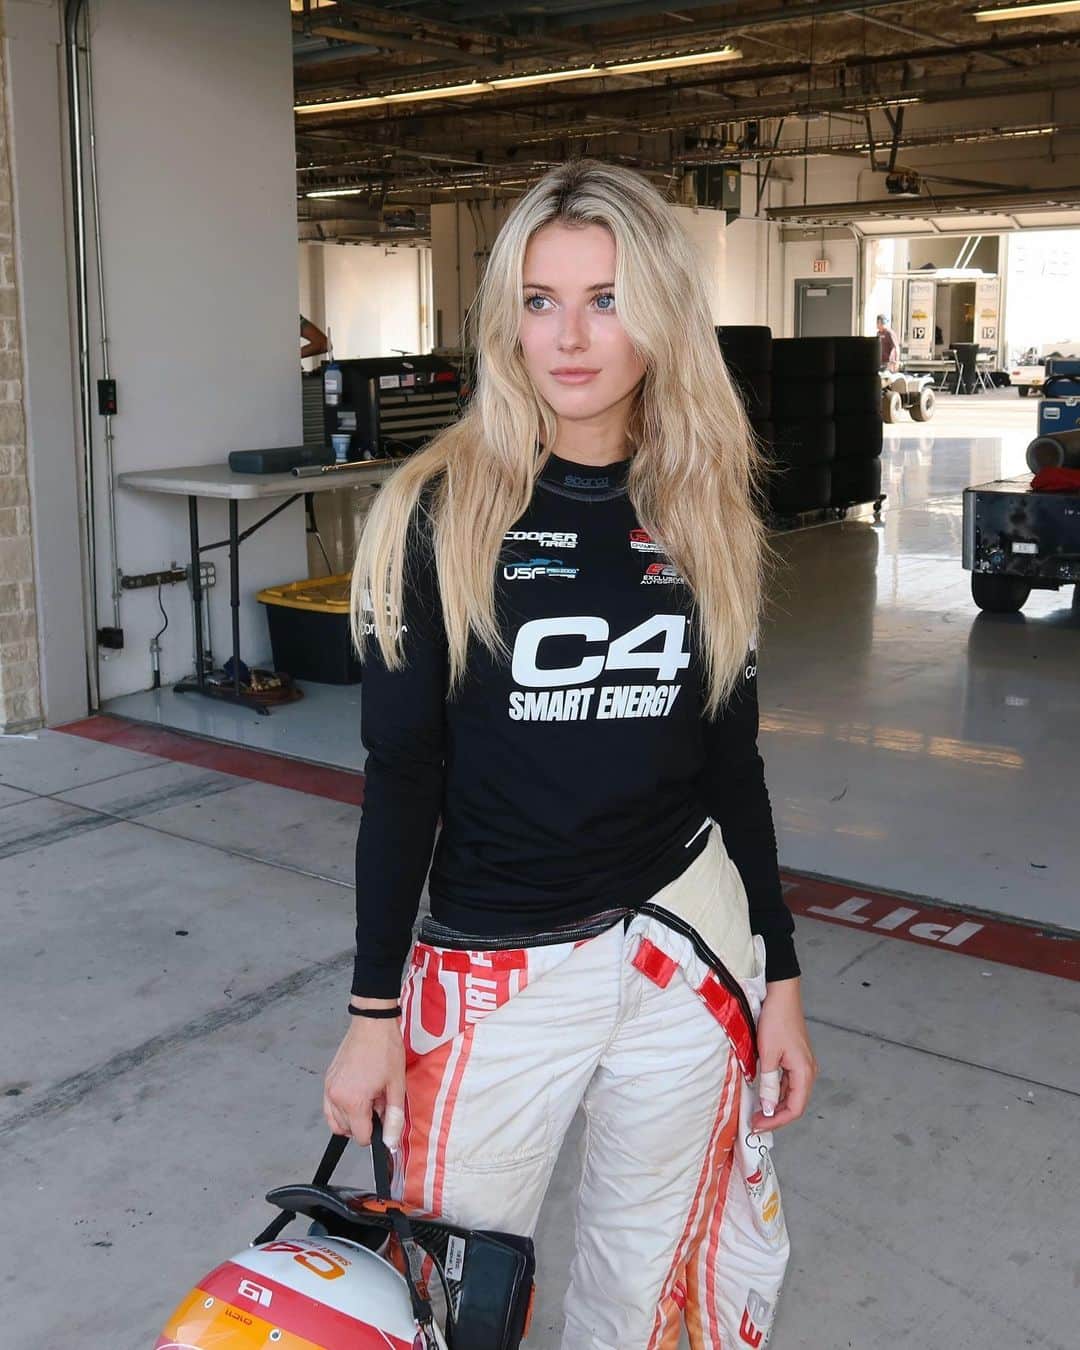 Lindsay Brewerのインスタグラム：「Not the weekend we were hoping for. Race 1 had some great battles and overtakes, but ultimately ended up p14. For race 2 an unfortunate error by the tire manufacturer resulted in me having an oval tire by mistake, ending my race early :/ that’s racing sometimes though! Ready to take the positives, move on and push in Portland next weekend! Thank you @c4energy @exclusiveautosport @cognizinciticoline for the support always!🏁」